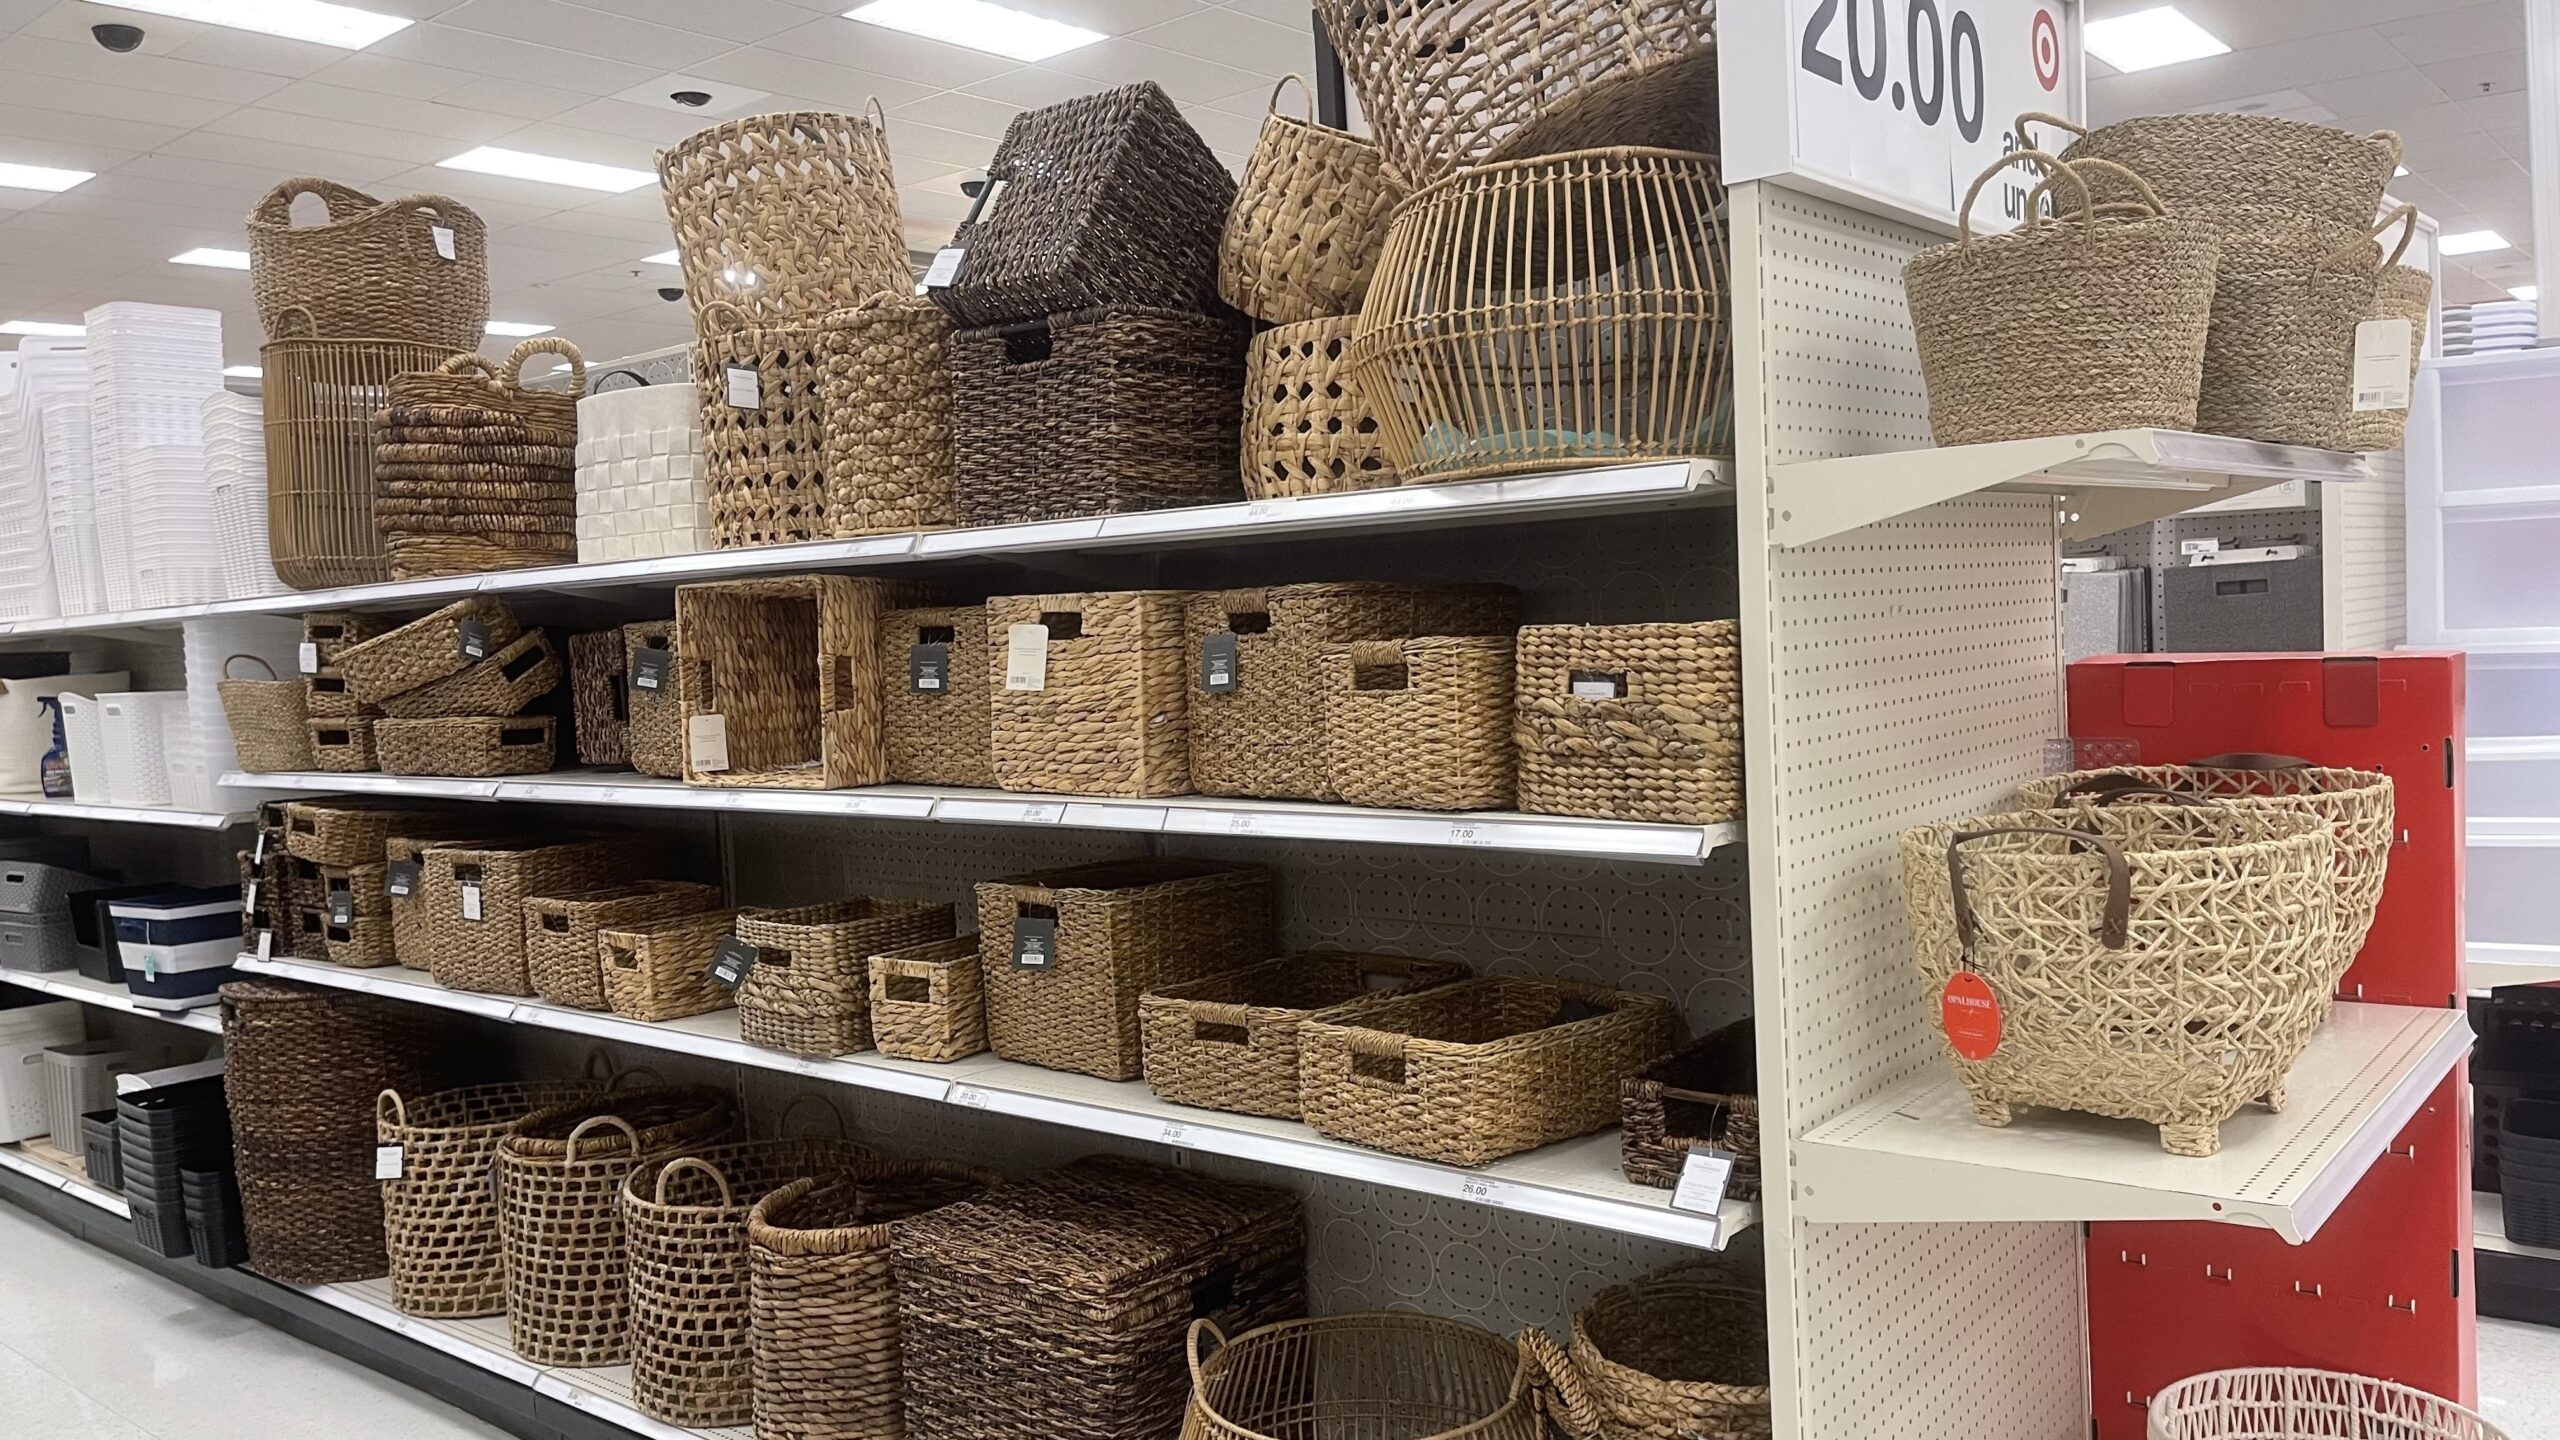 Target 4 Day Sale Ends Tonight! Save Big on Storage Bins, Cube Shelves